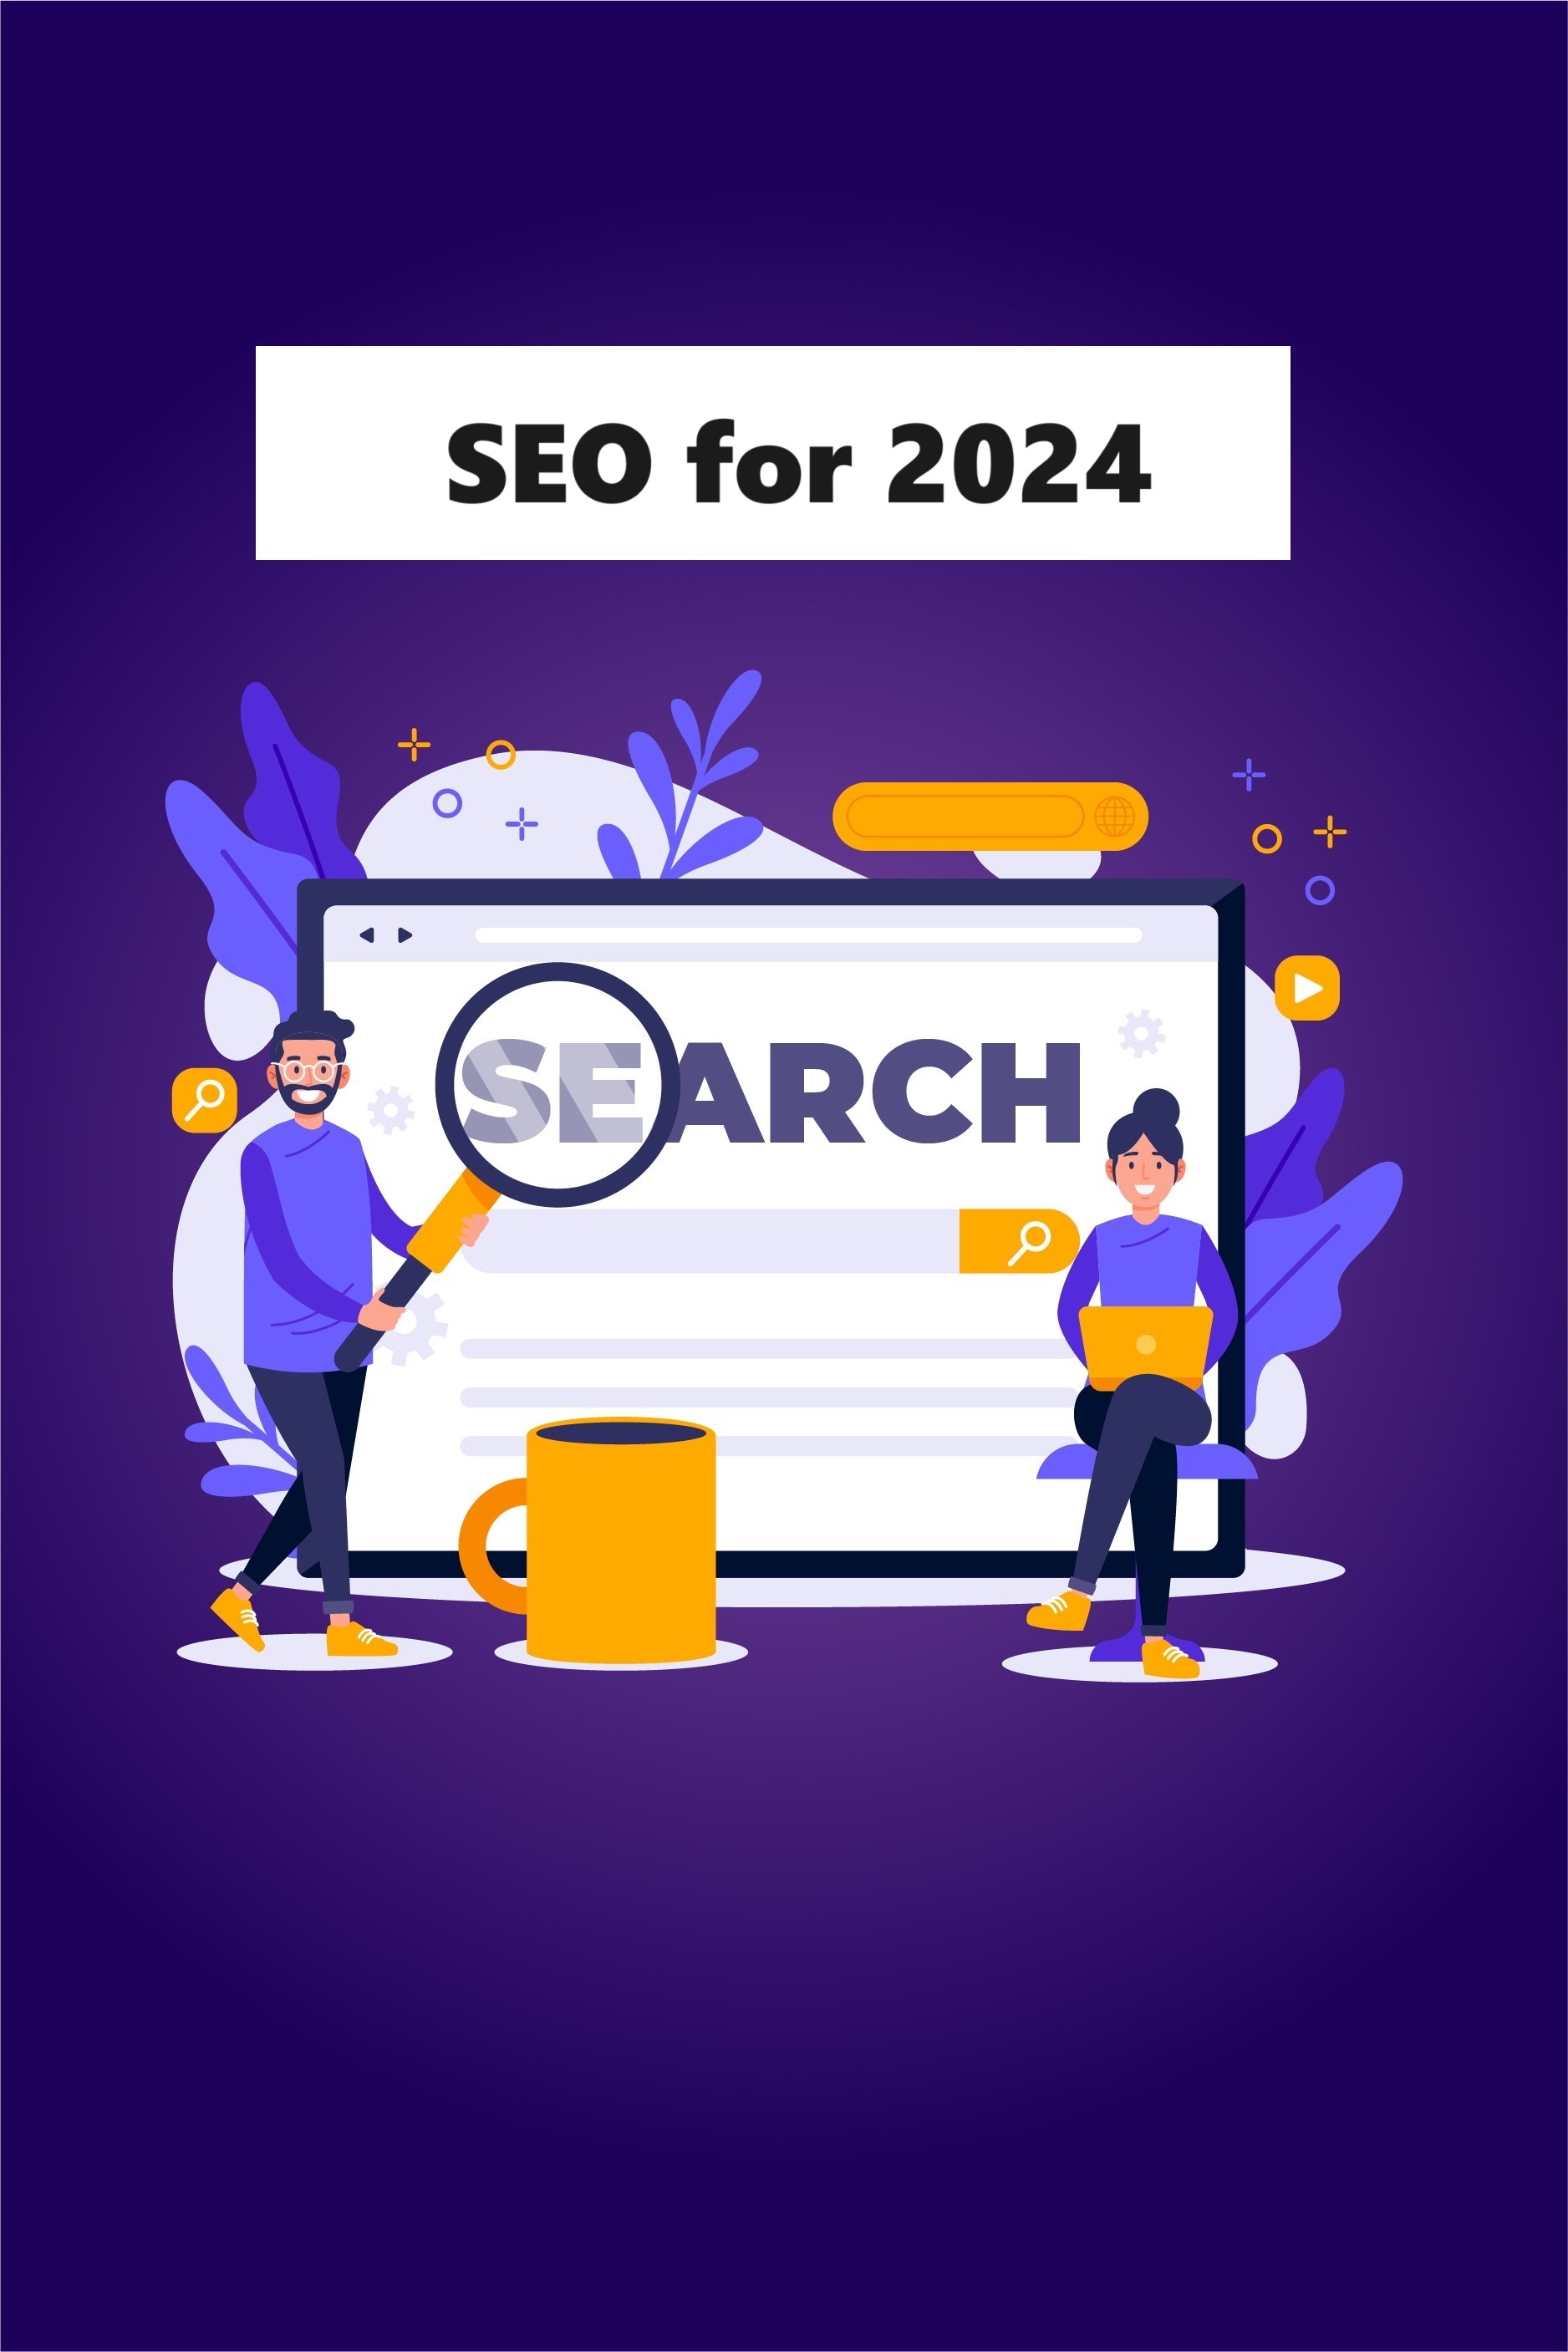 Search Engines for 2024